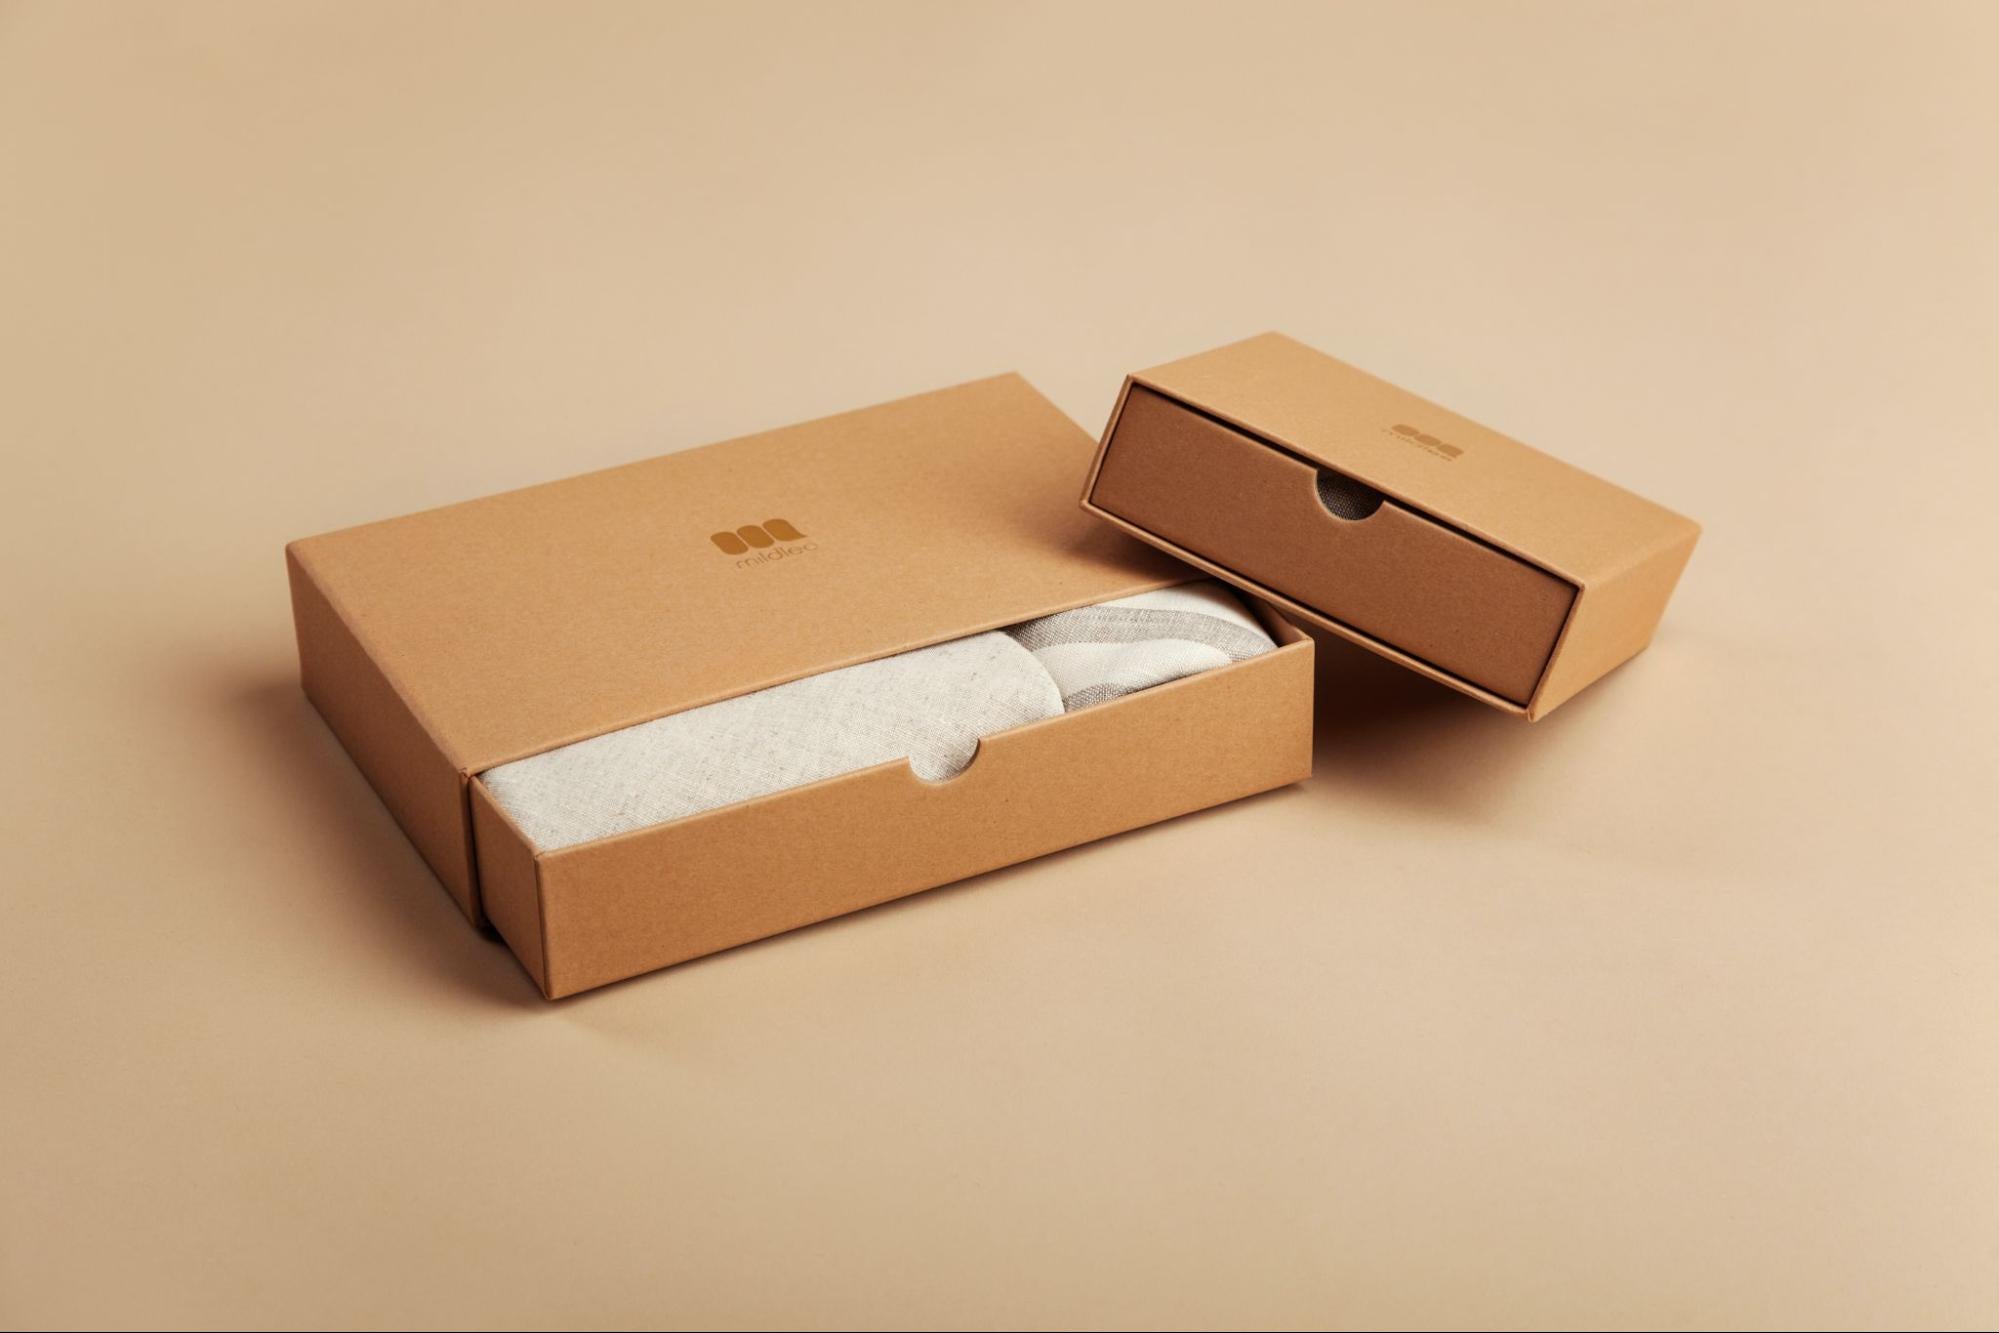 Subscription commerce shipping boxes